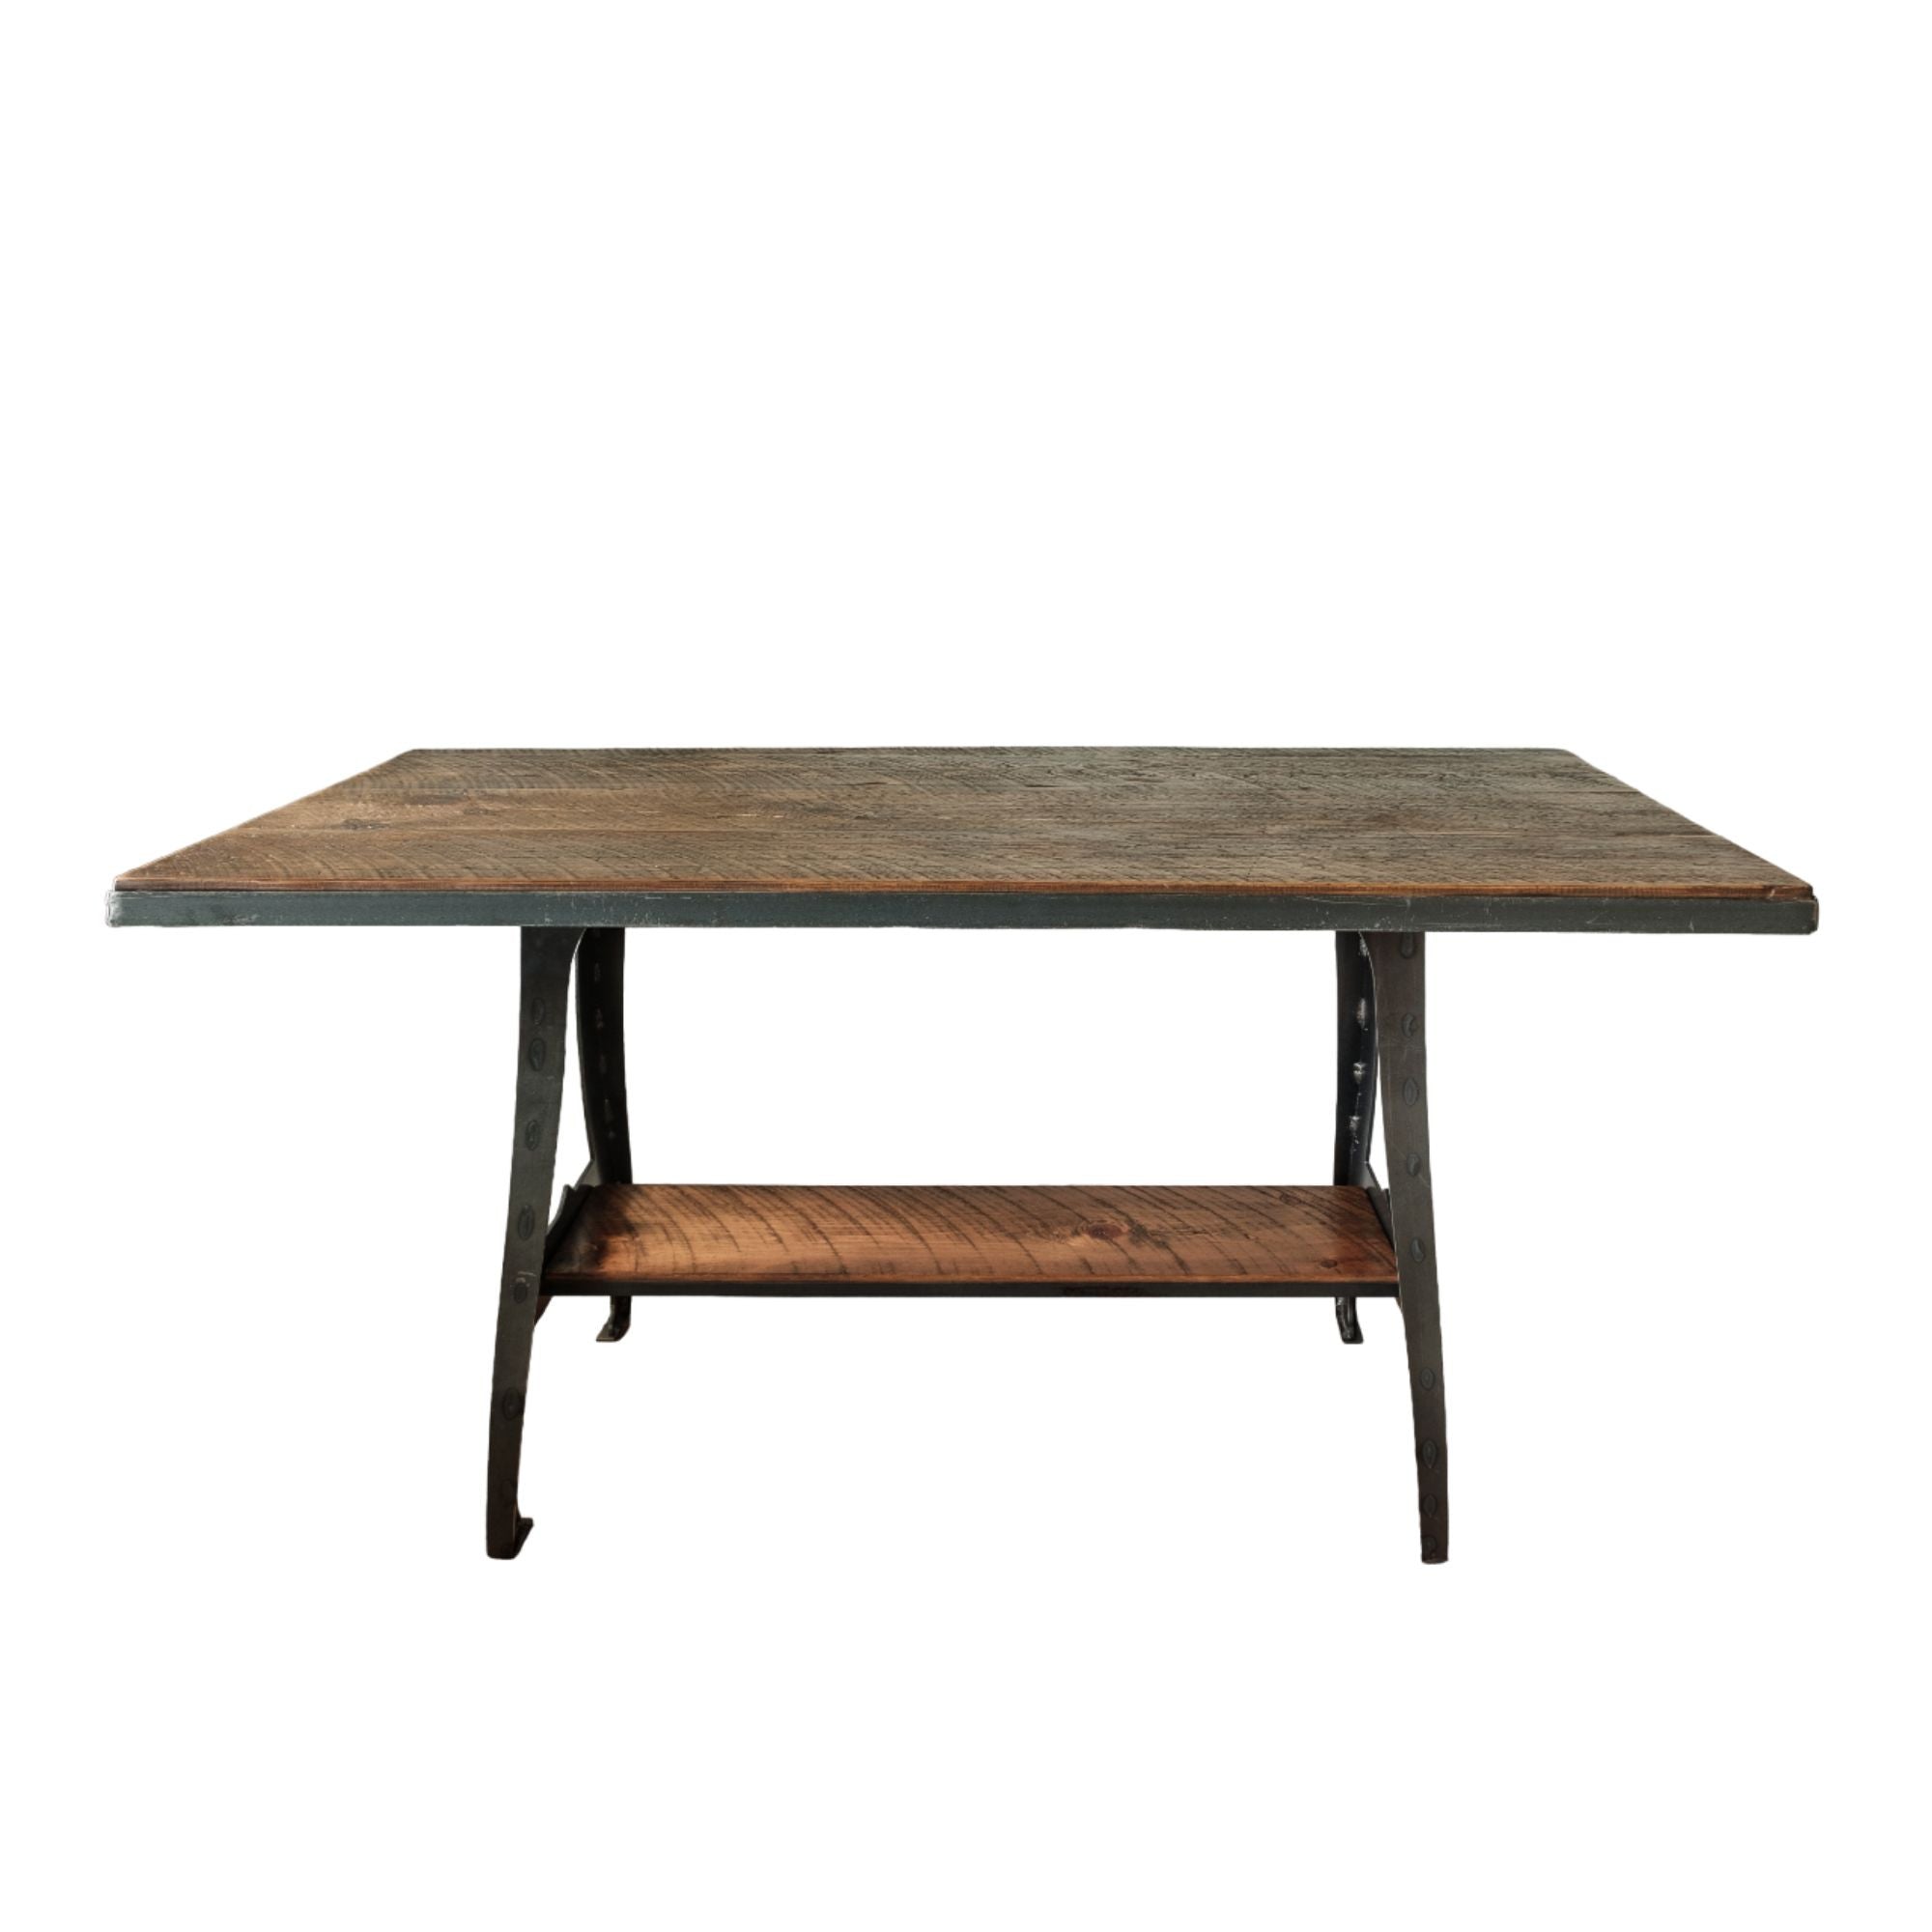 72" Brown And Black Solid Wood And Steel Dining Table